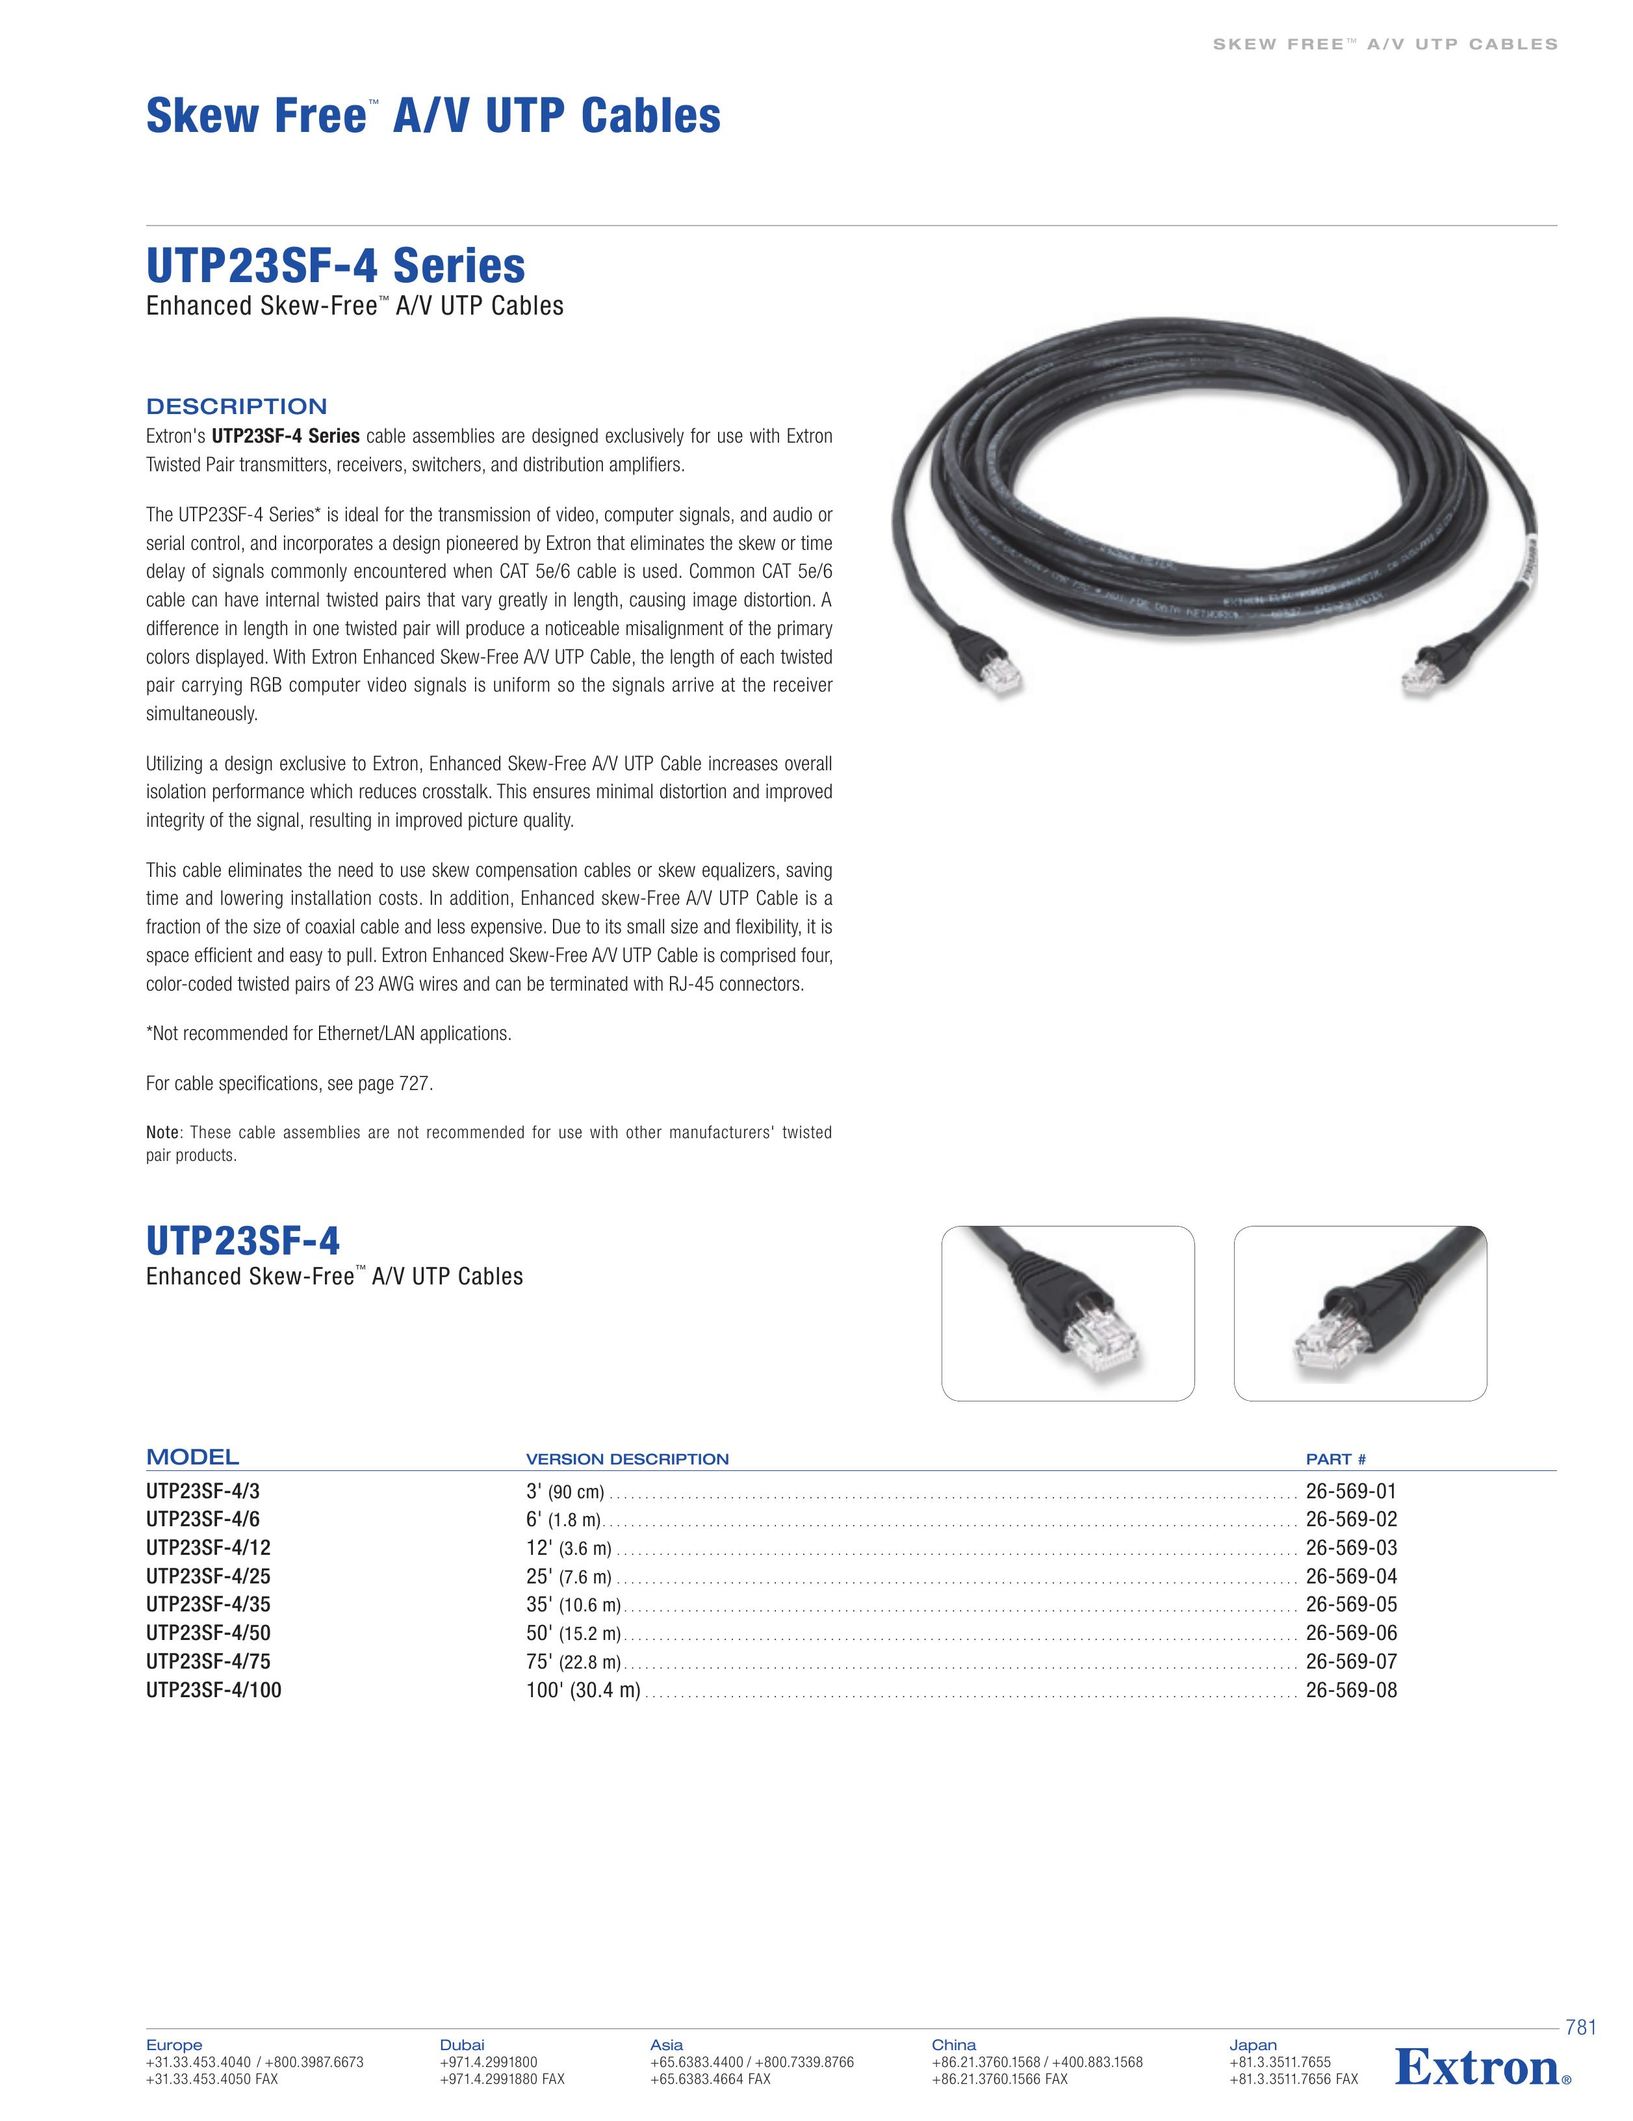 Extron electronic UTP23SF-4/35 TV Cables User Manual